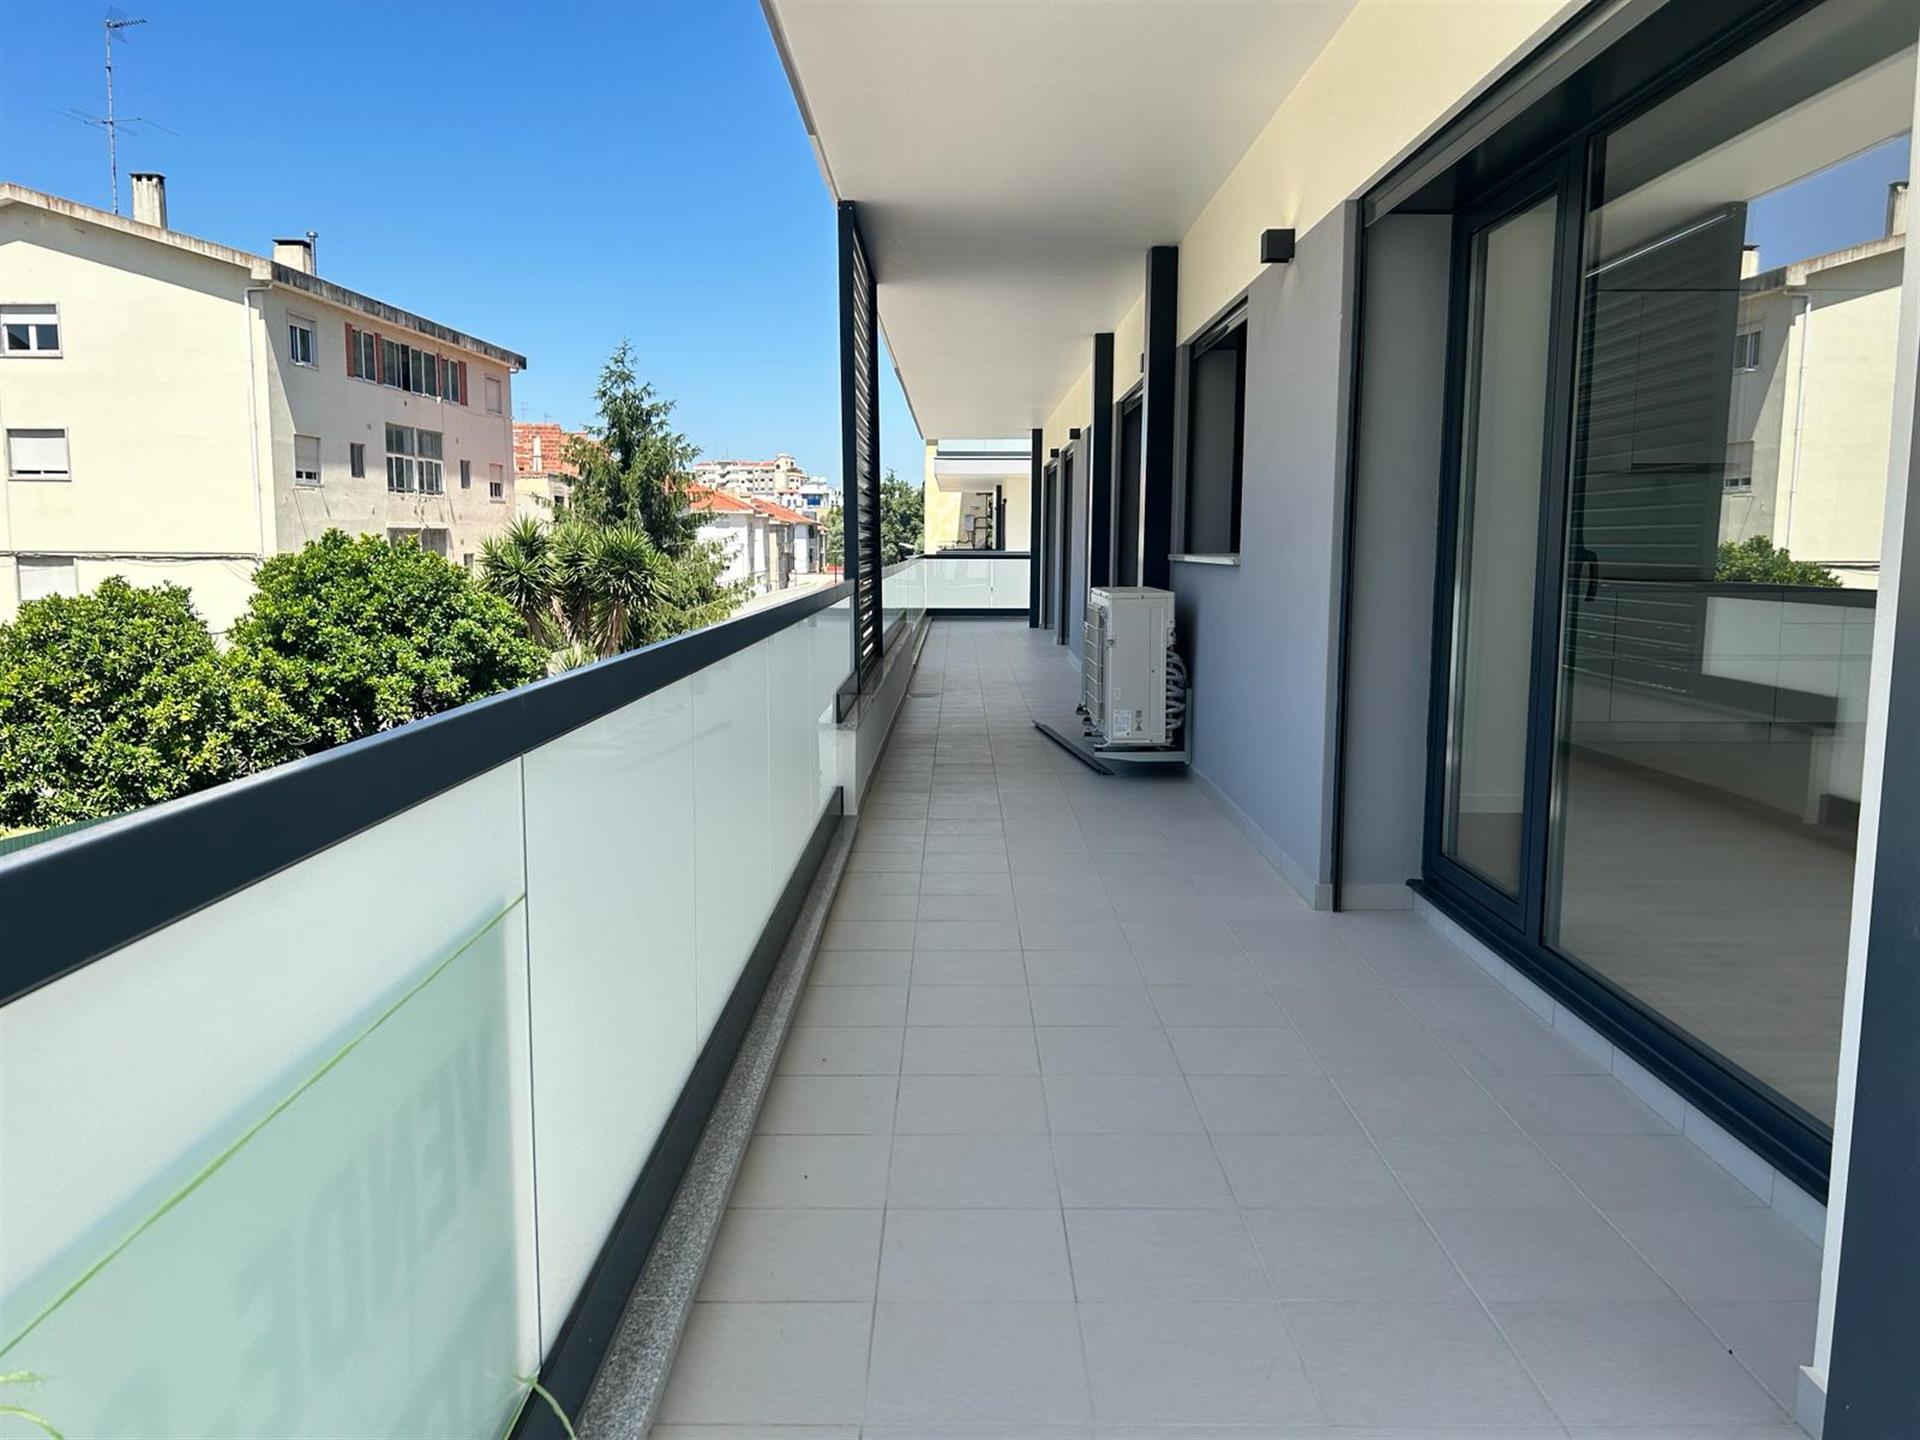 Superior quality 3 bedroom flat with a privileged location in Leiria 